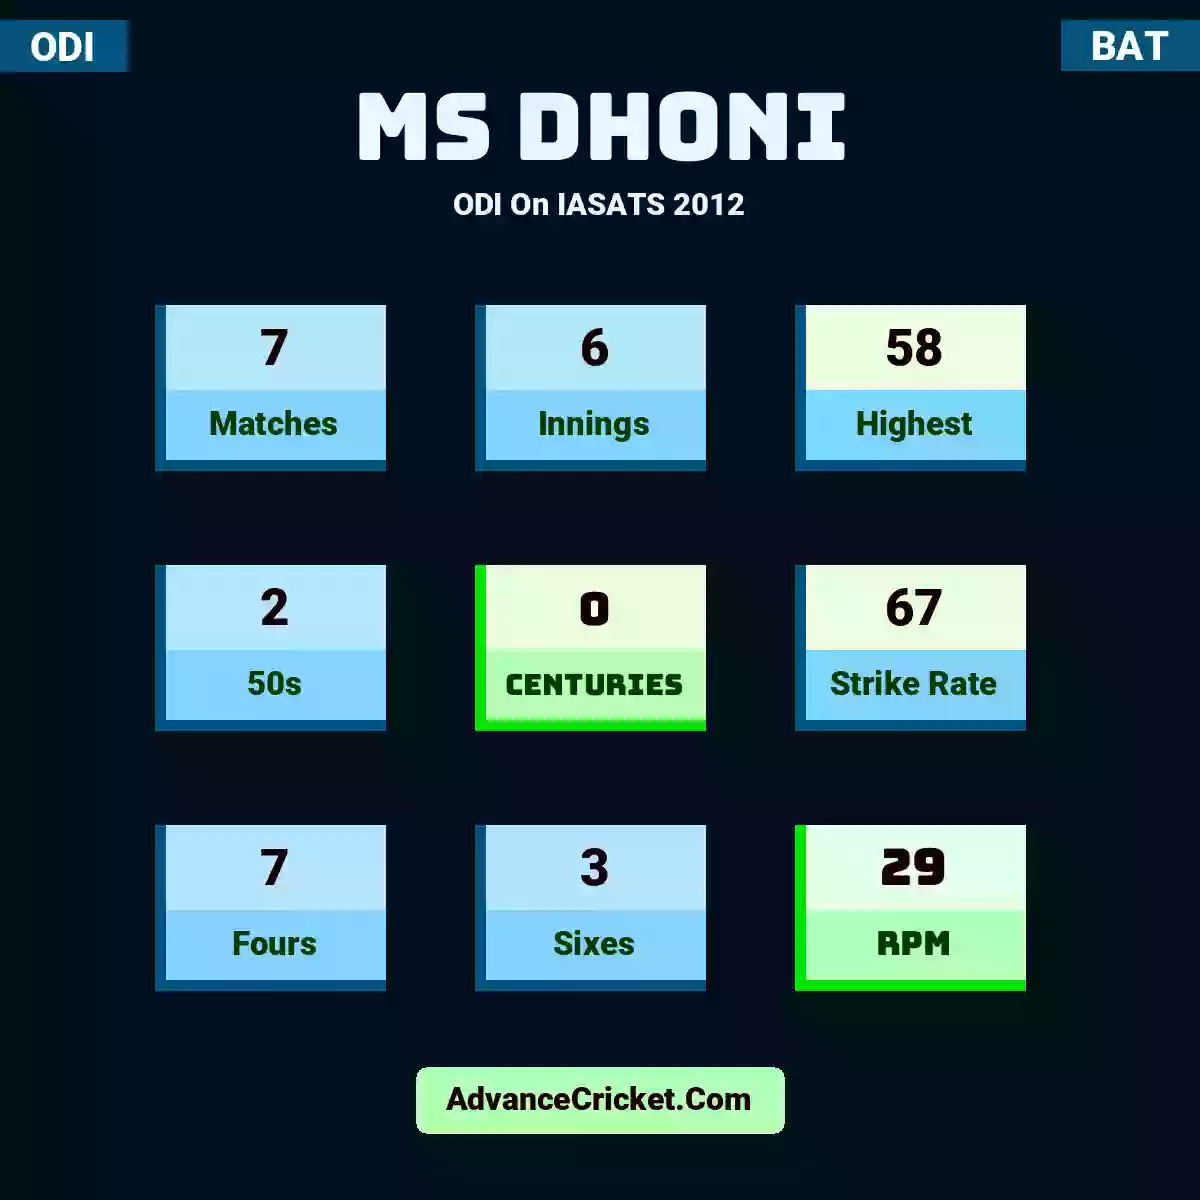 MS Dhoni ODI  On IASATS 2012, MS Dhoni played 7 matches, scored 58 runs as highest, 2 half-centuries, and 0 centuries, with a strike rate of 67. M.Dhoni hit 7 fours and 3 sixes, with an RPM of 29.